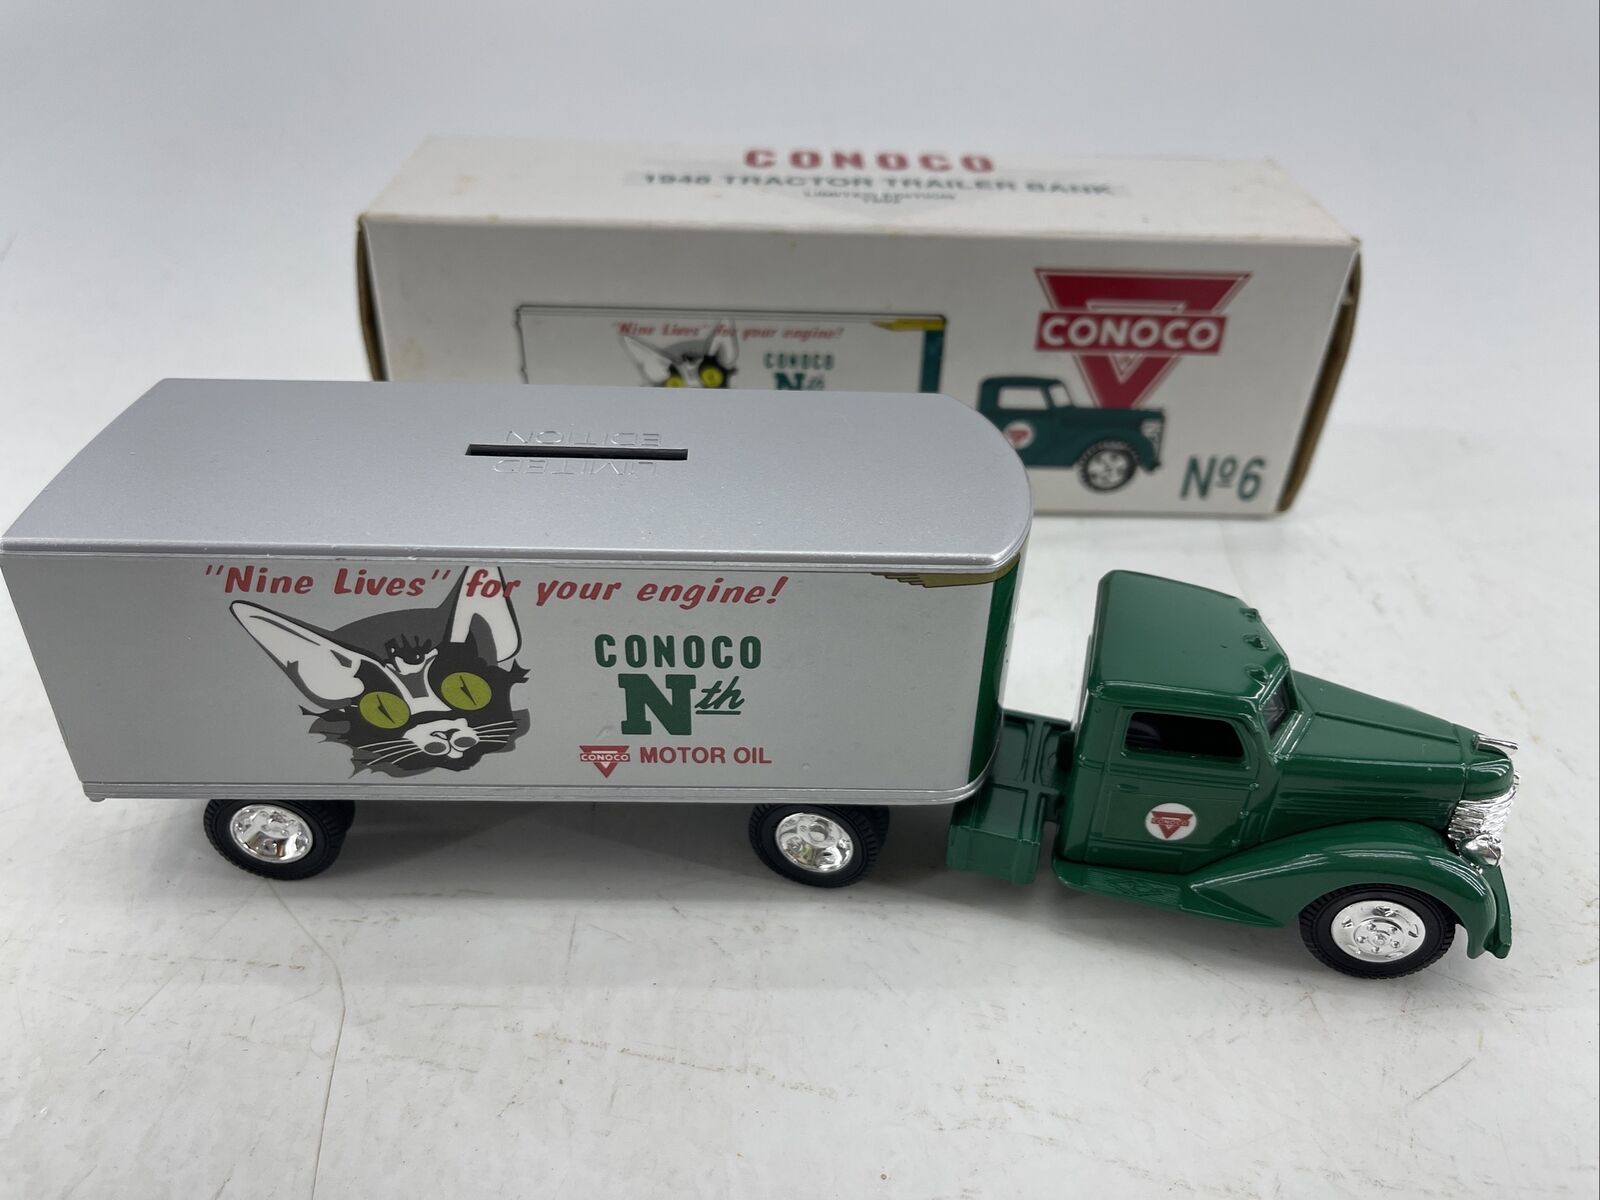 NEW Conoco Nth Motor Oil 1948 Tractor Trailer Coin Bank #7573 1992 Die-Cast